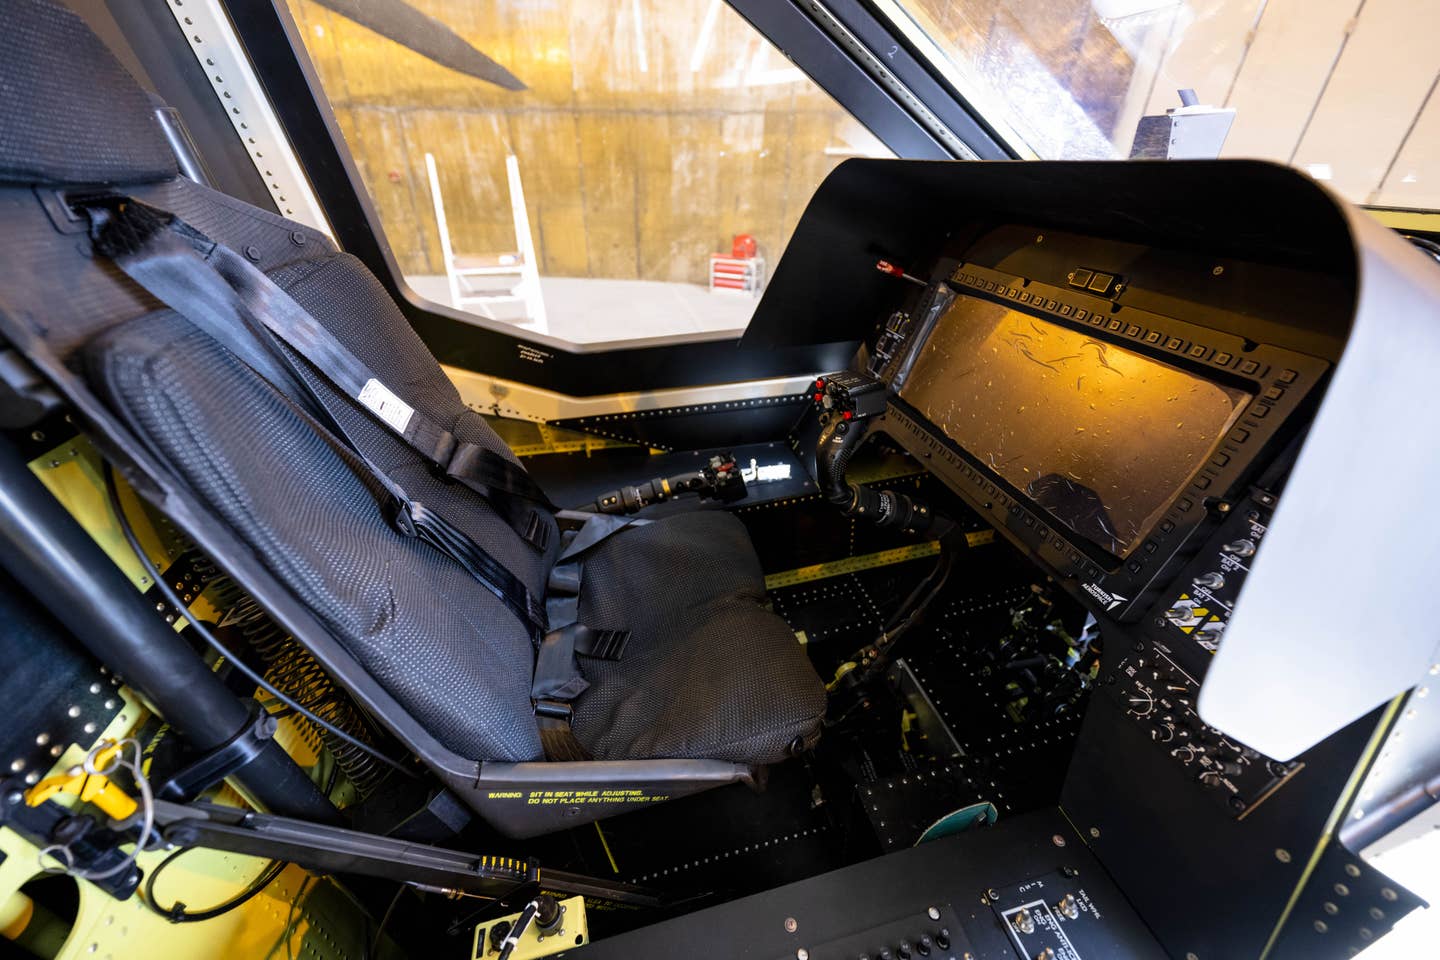 An interior view of the T929, with its wide-area display. <em>Photo by Aytac Unal/Anadolu Agency via Getty Images</em>